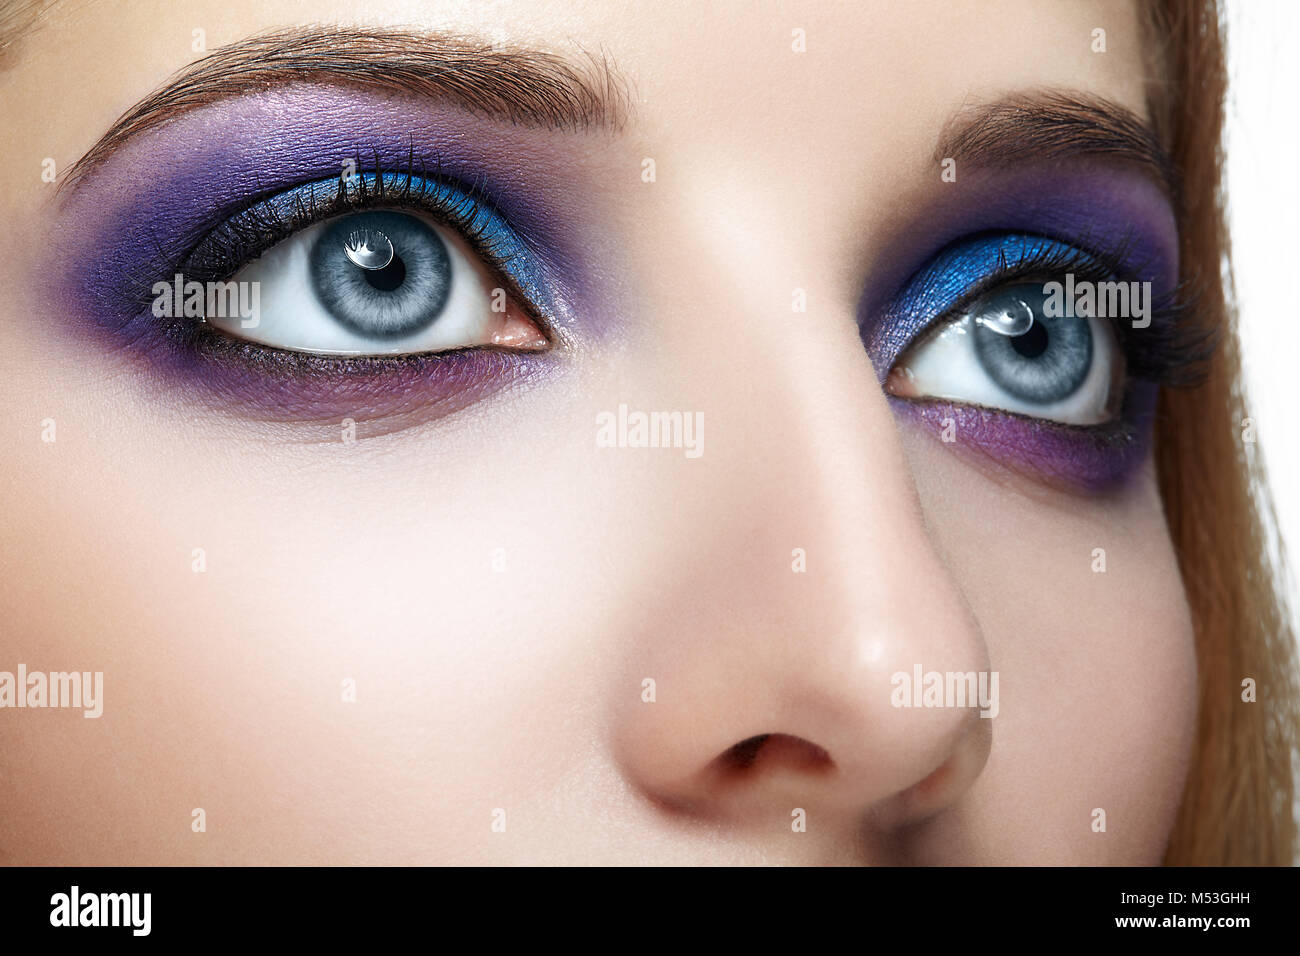 Closeup shot of female face eye with blue and violet makeup Stock Photo